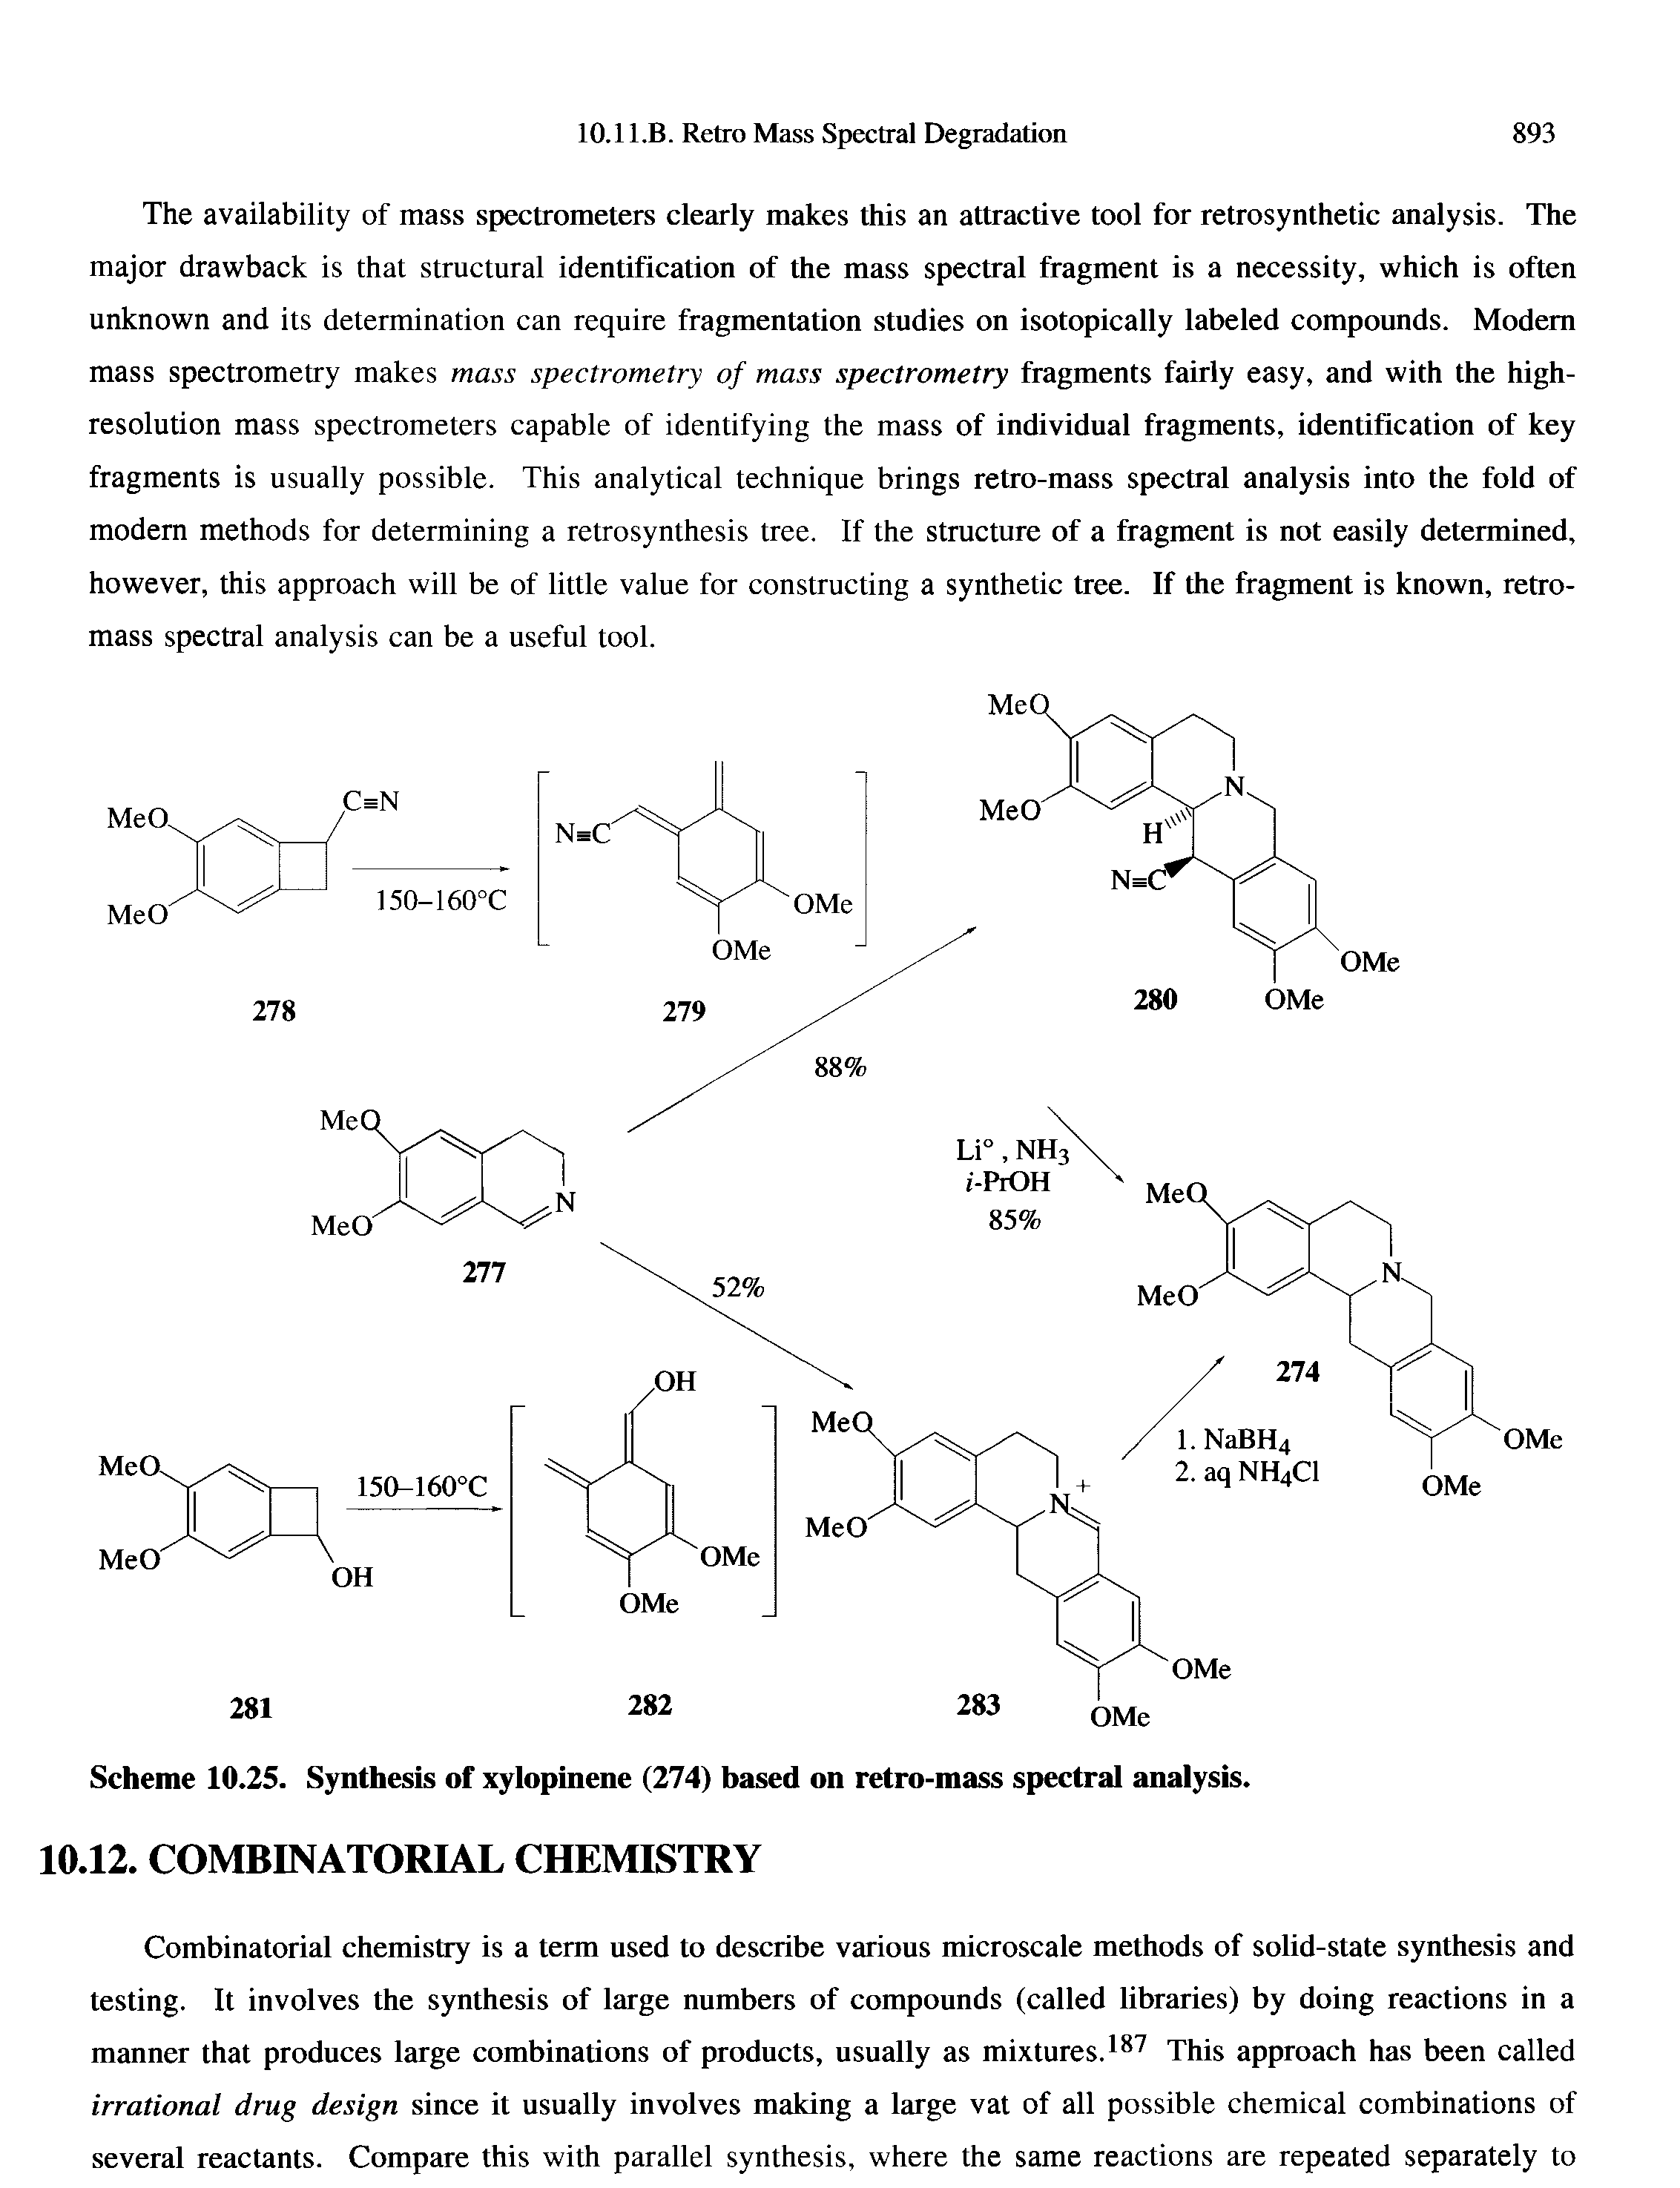 Scheme 10.25. Synthesis of xylopinene (274) based on retro-mass spectral analysis.